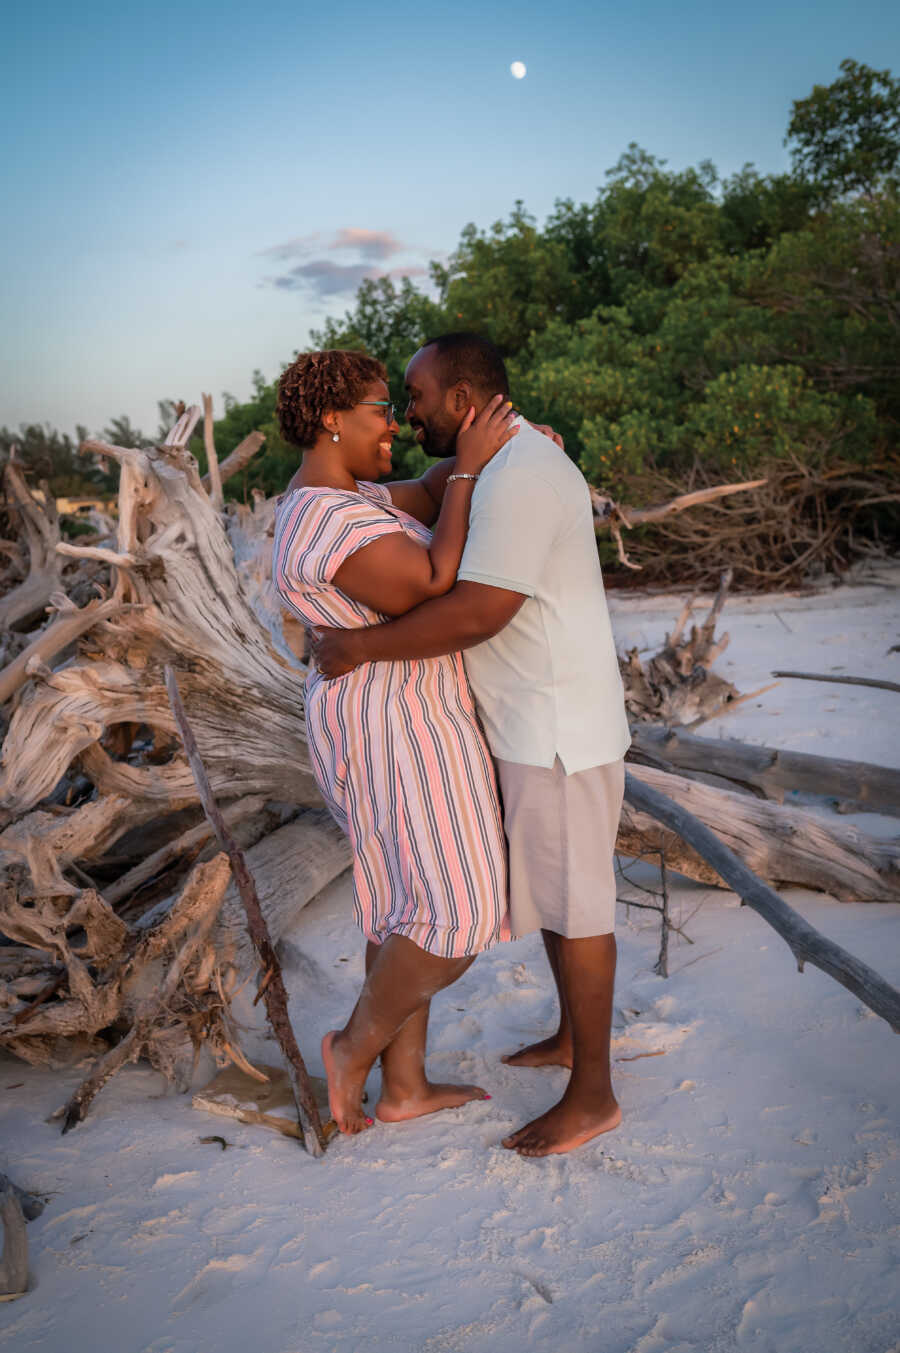 Married couple tried to conceive take photos on the beach while lovingly embracing each other